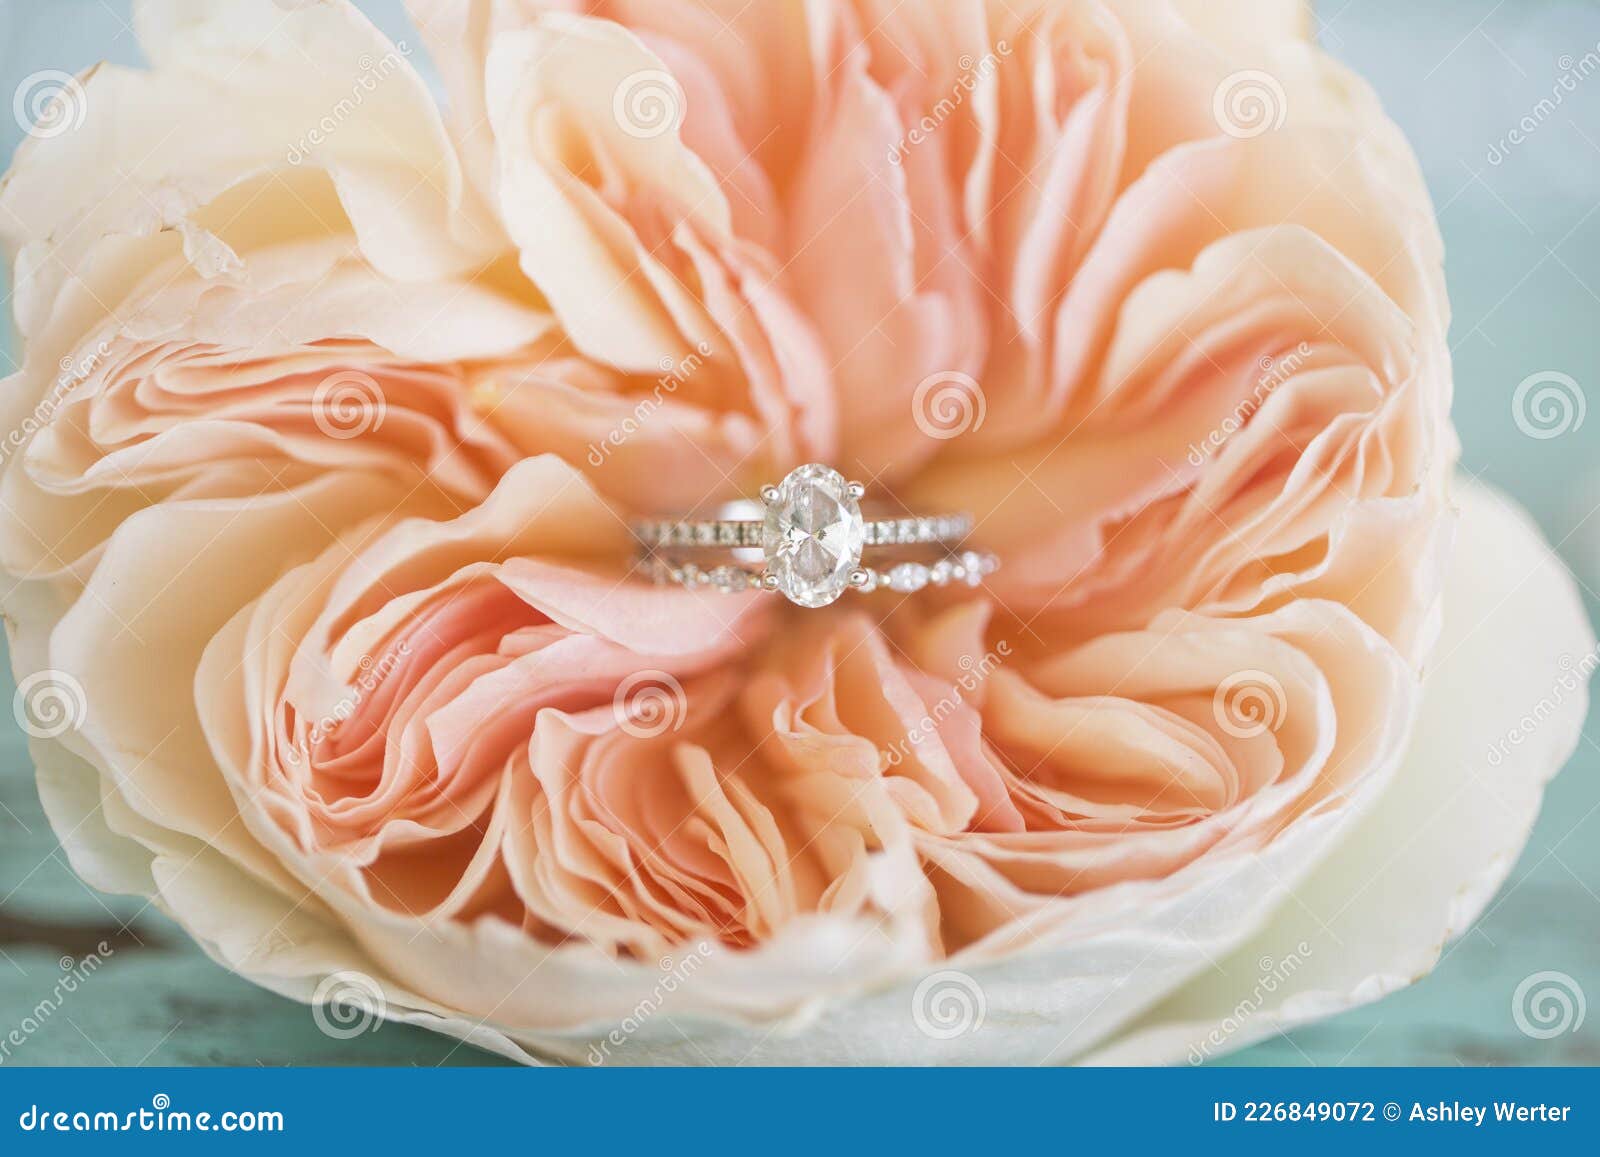 ring details in a wedding flower.